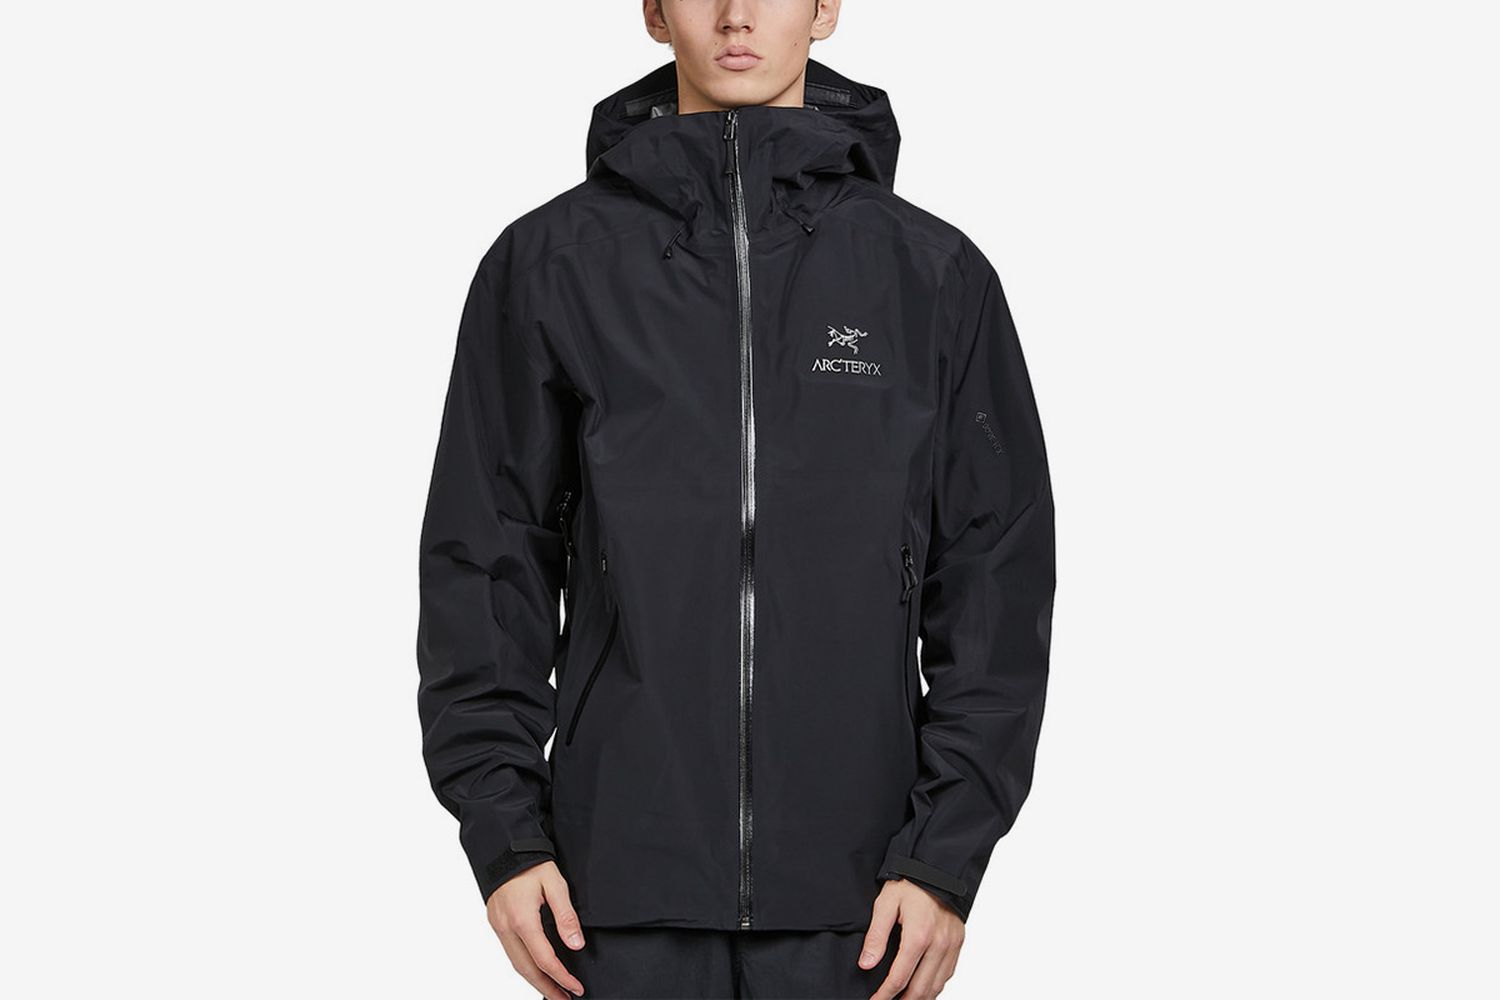 Shop the Best Arc'teryx Clothing for Winter 2021 Here